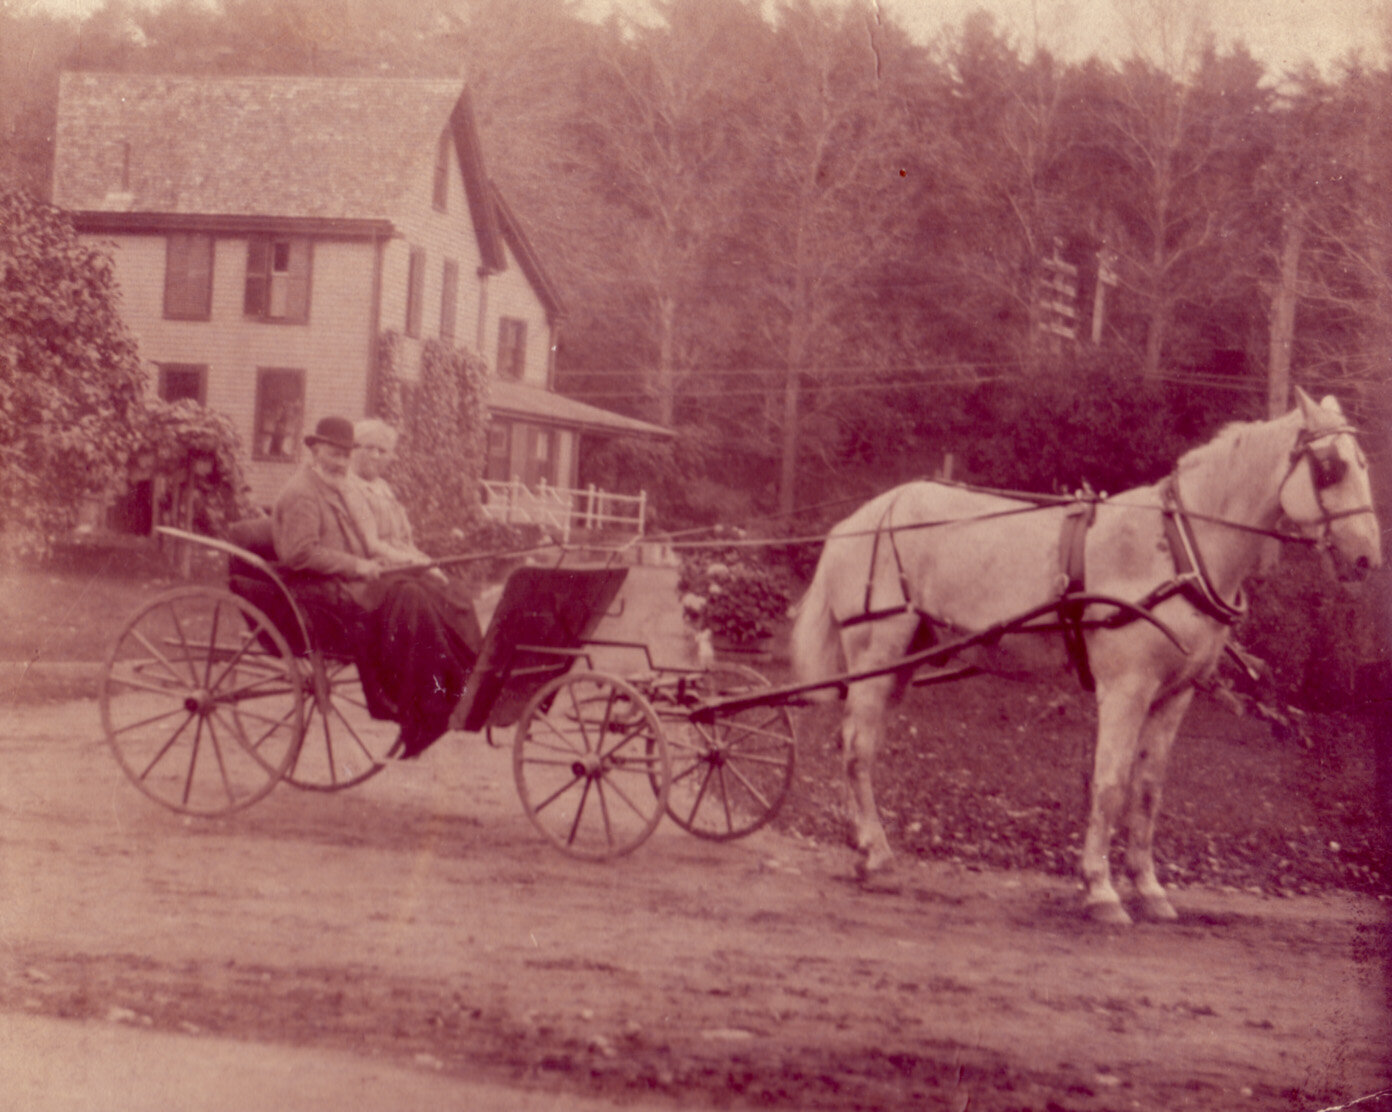 Daniel Linehan and his wife Mary in front of their house.  Daniel was always listed as a laborer, but he and his son John had one of the major construction companies in Beverly Farms at the end on 19th to early 20th century.